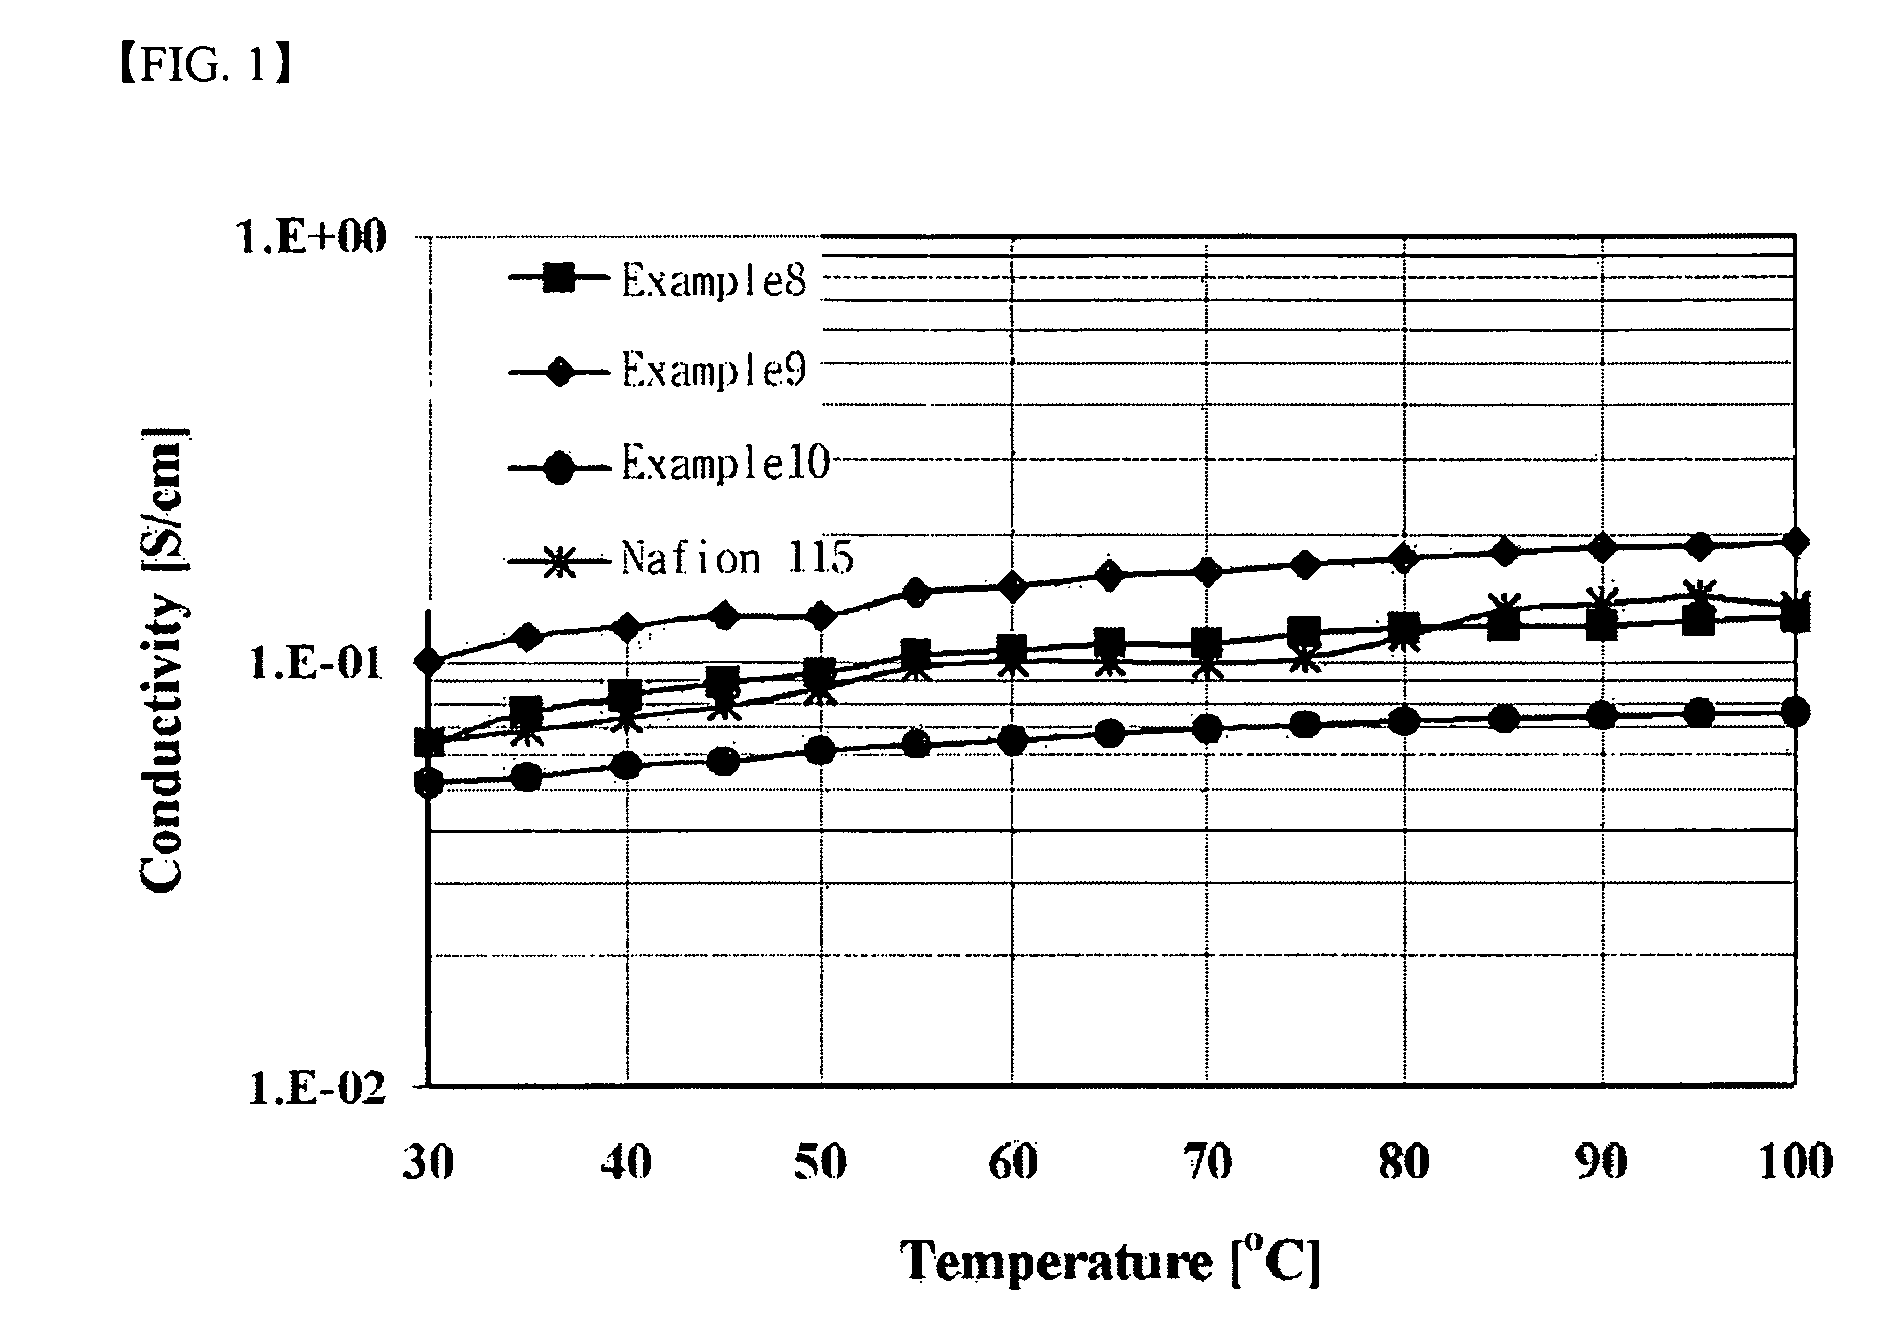 Branched and sulphonated multi block copolymer and electrolyte membrane using the same